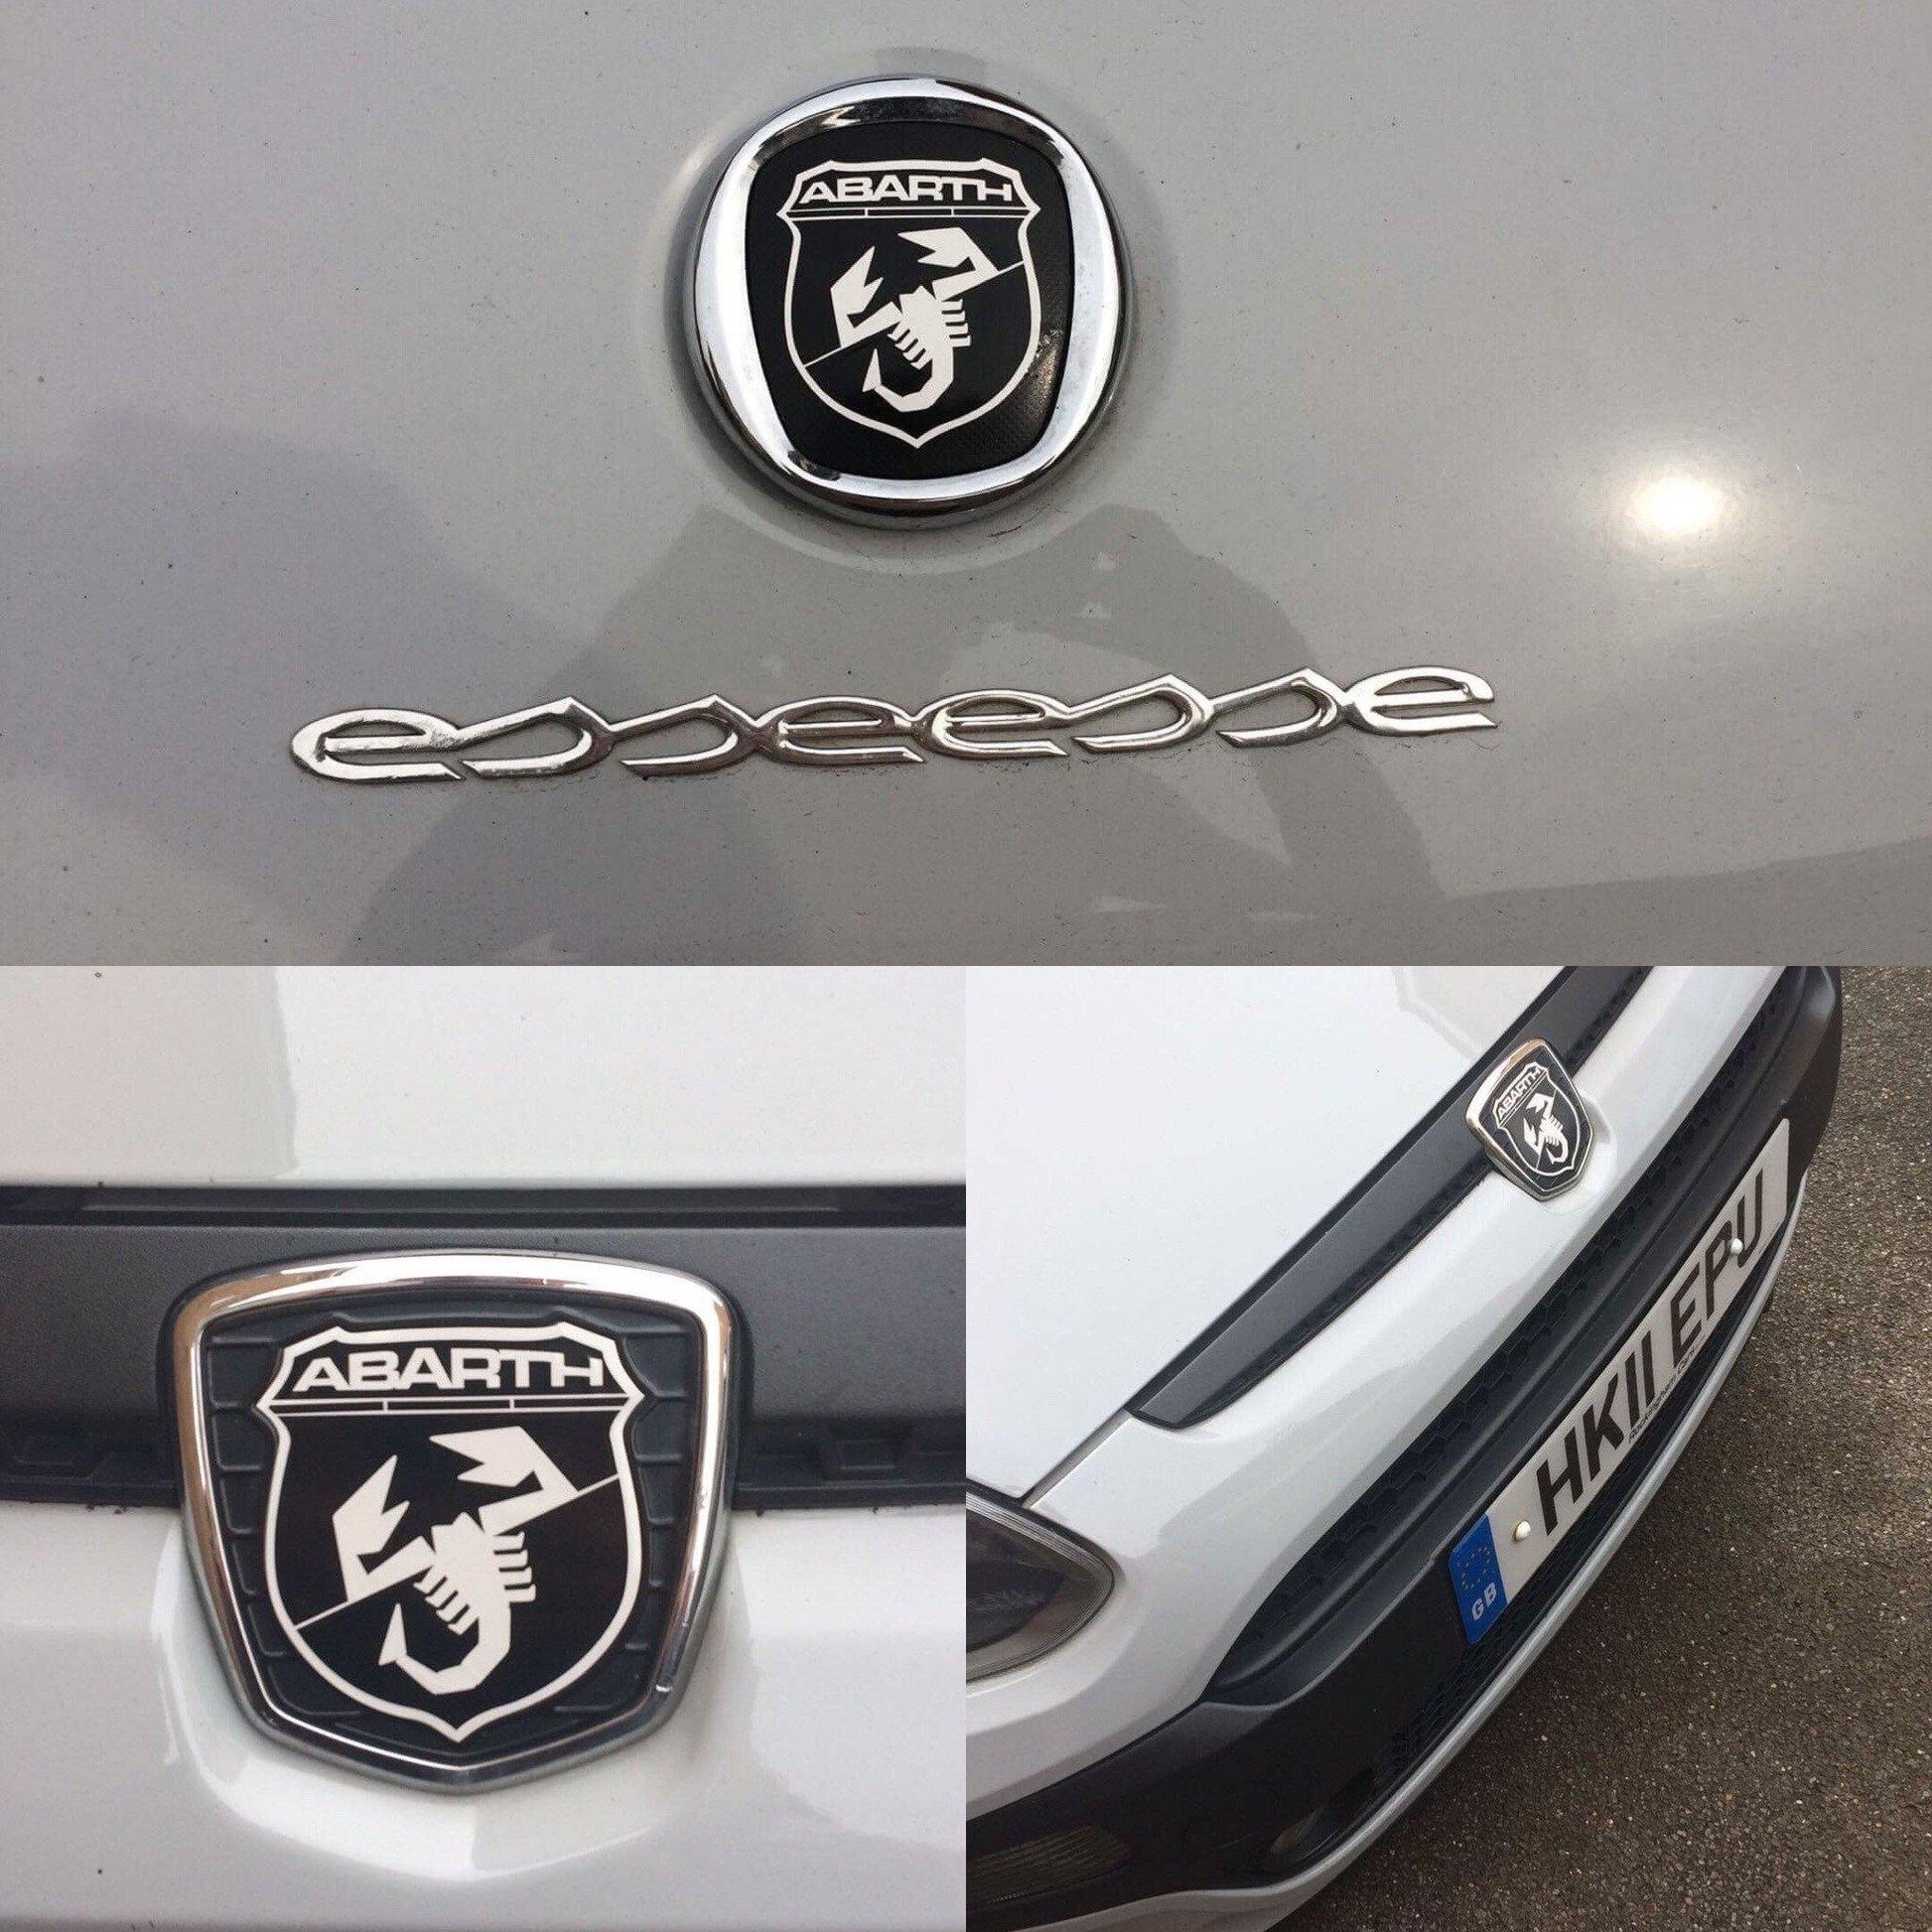 Abarth Punto Evo Badge decals front and back - Abarth Tuning